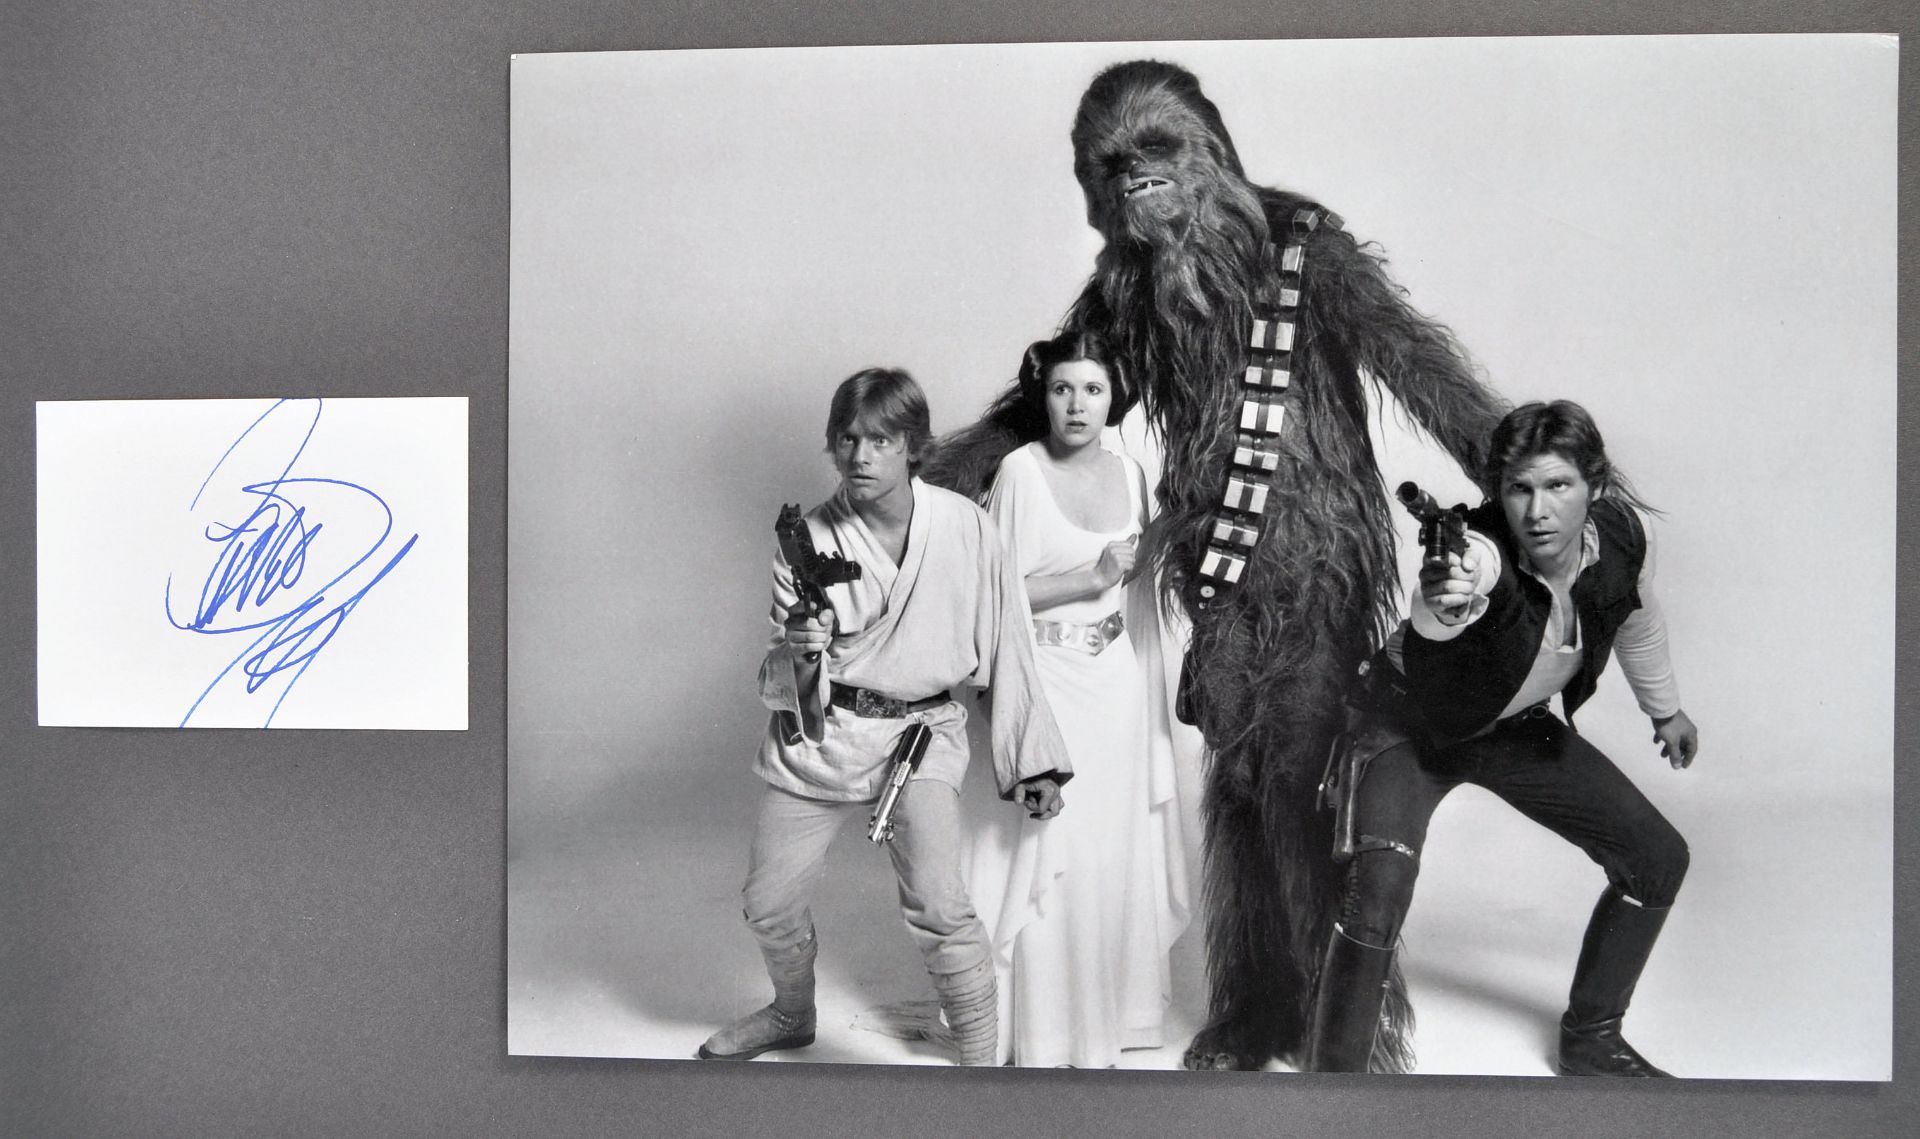 CARRIE FISHER - STAR WARS - AUTOGRAPHED CARD & 16X12" PHOTO